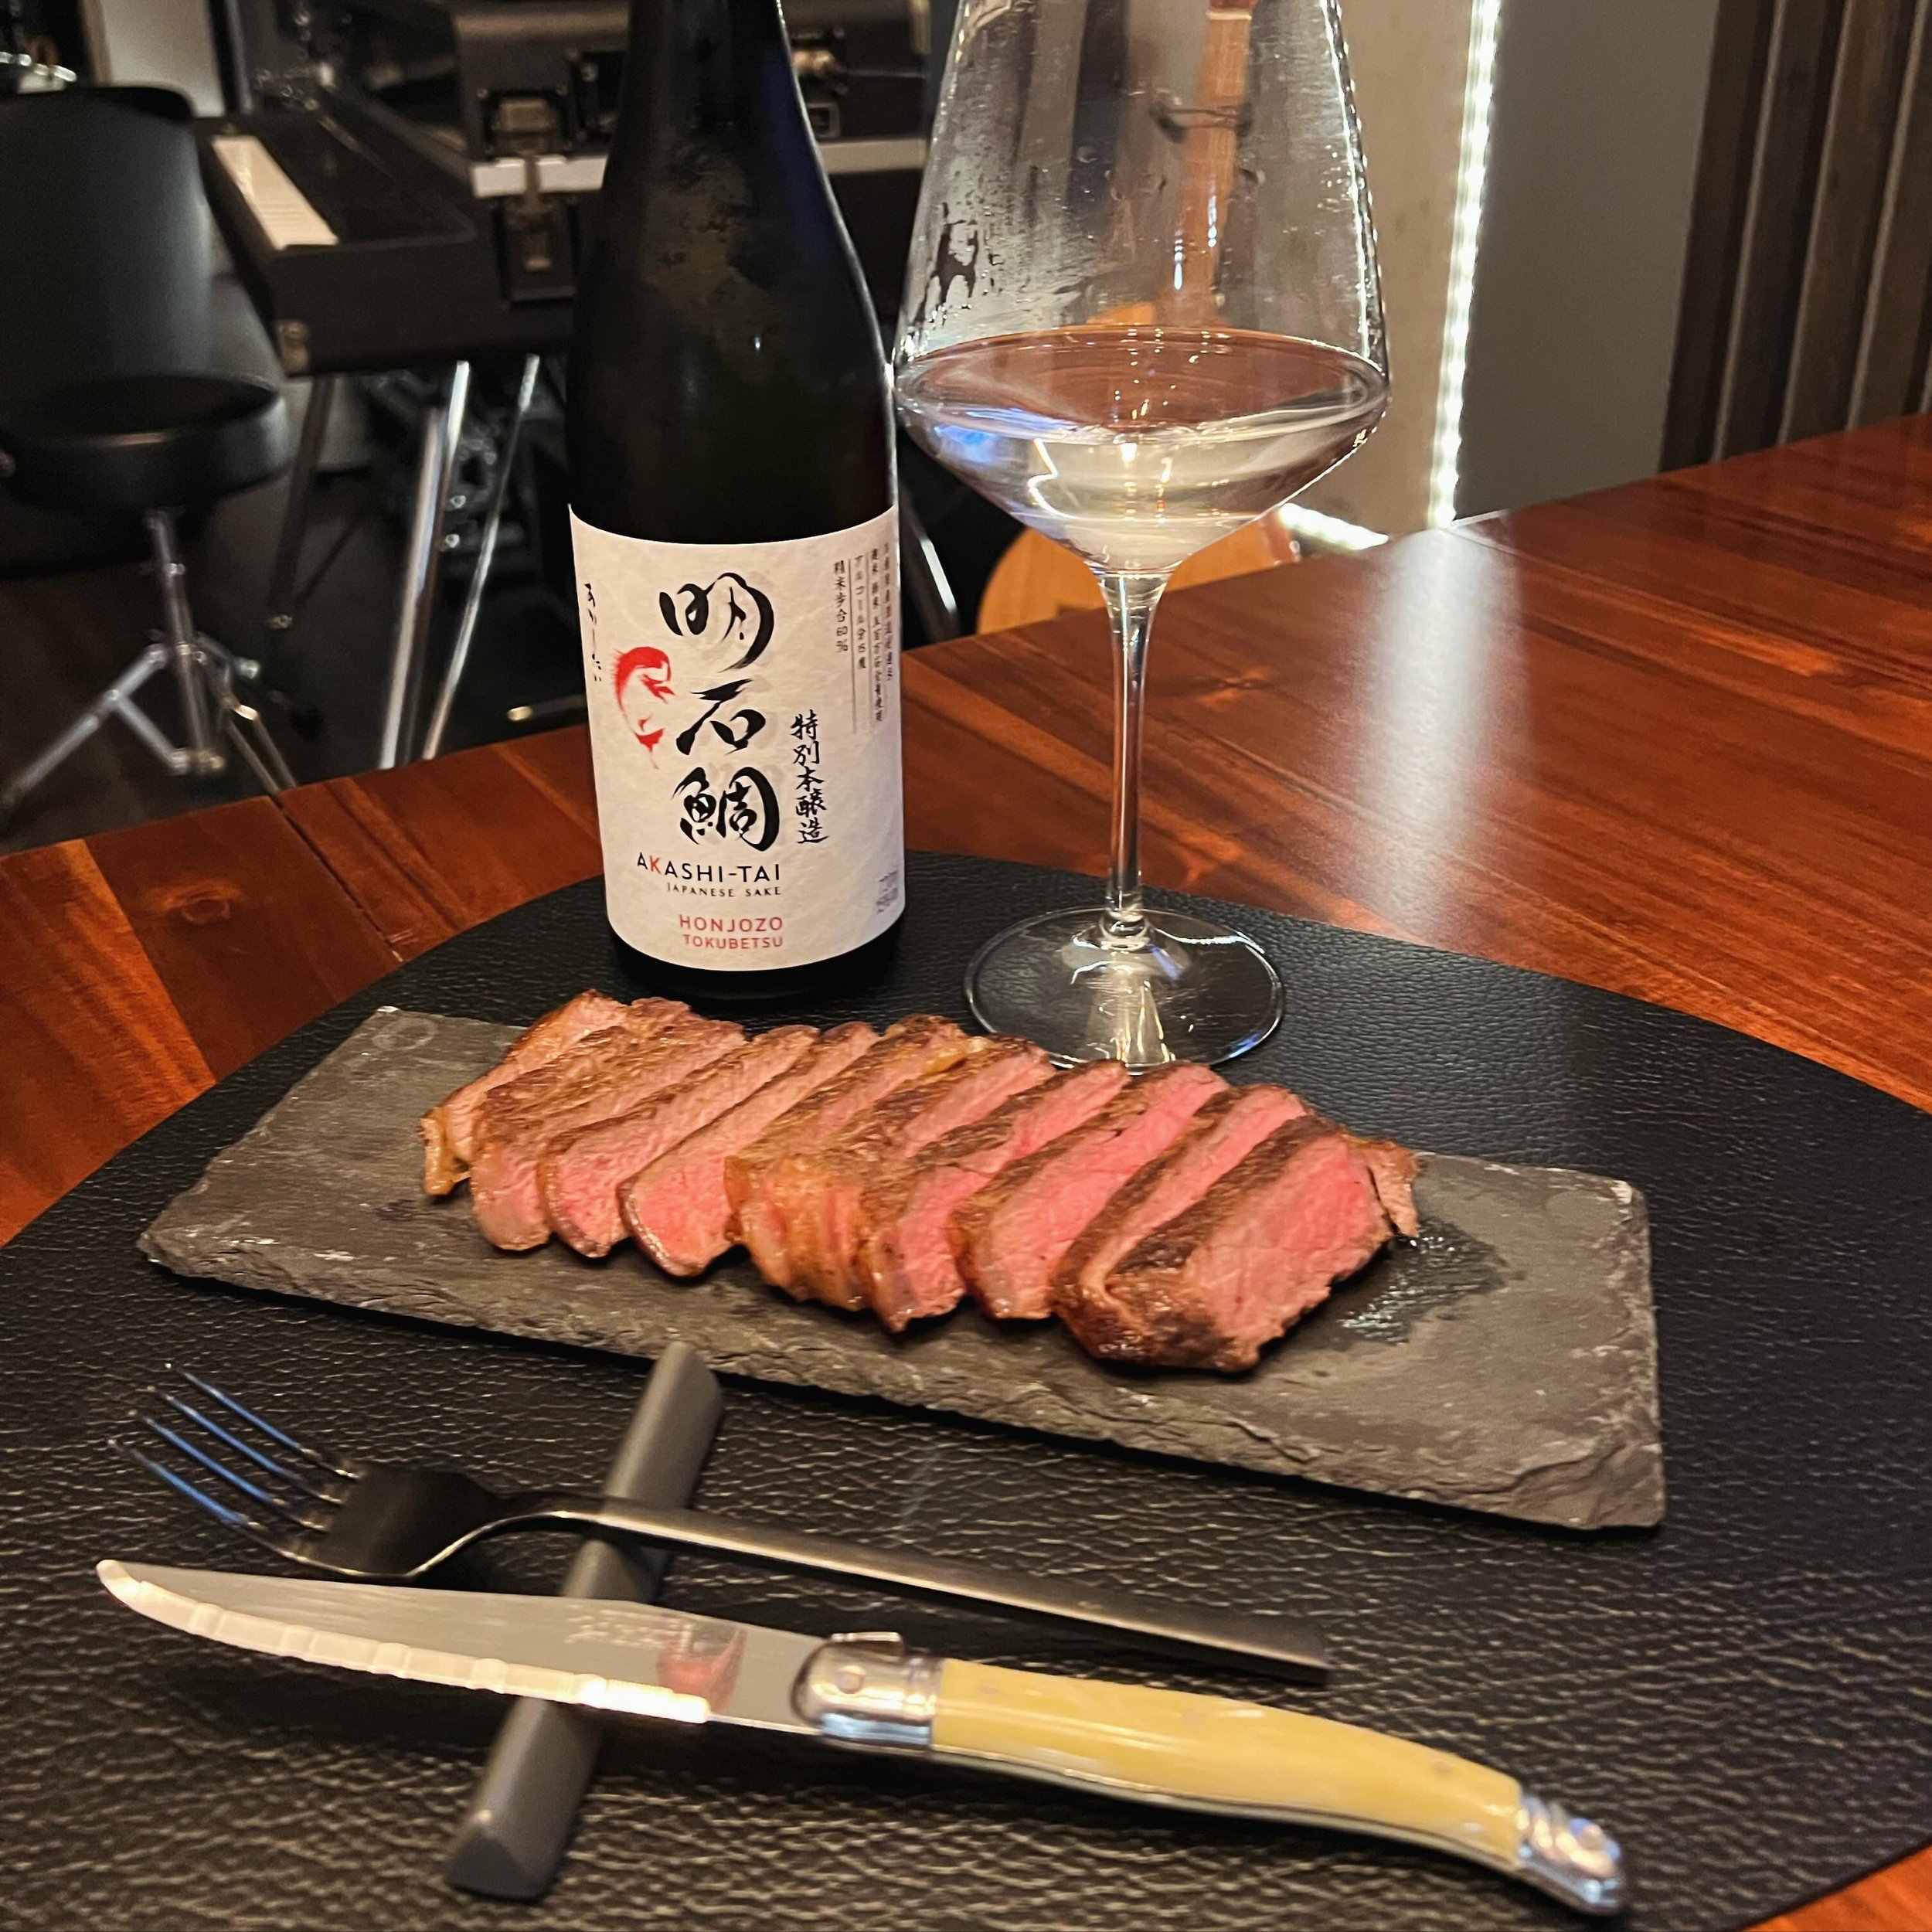 &bull;|&bull; Midweek pleasure. 21-day dry aged rib eye. Neat. Paired with clean and savoury Akashi-Tai Tokobetsu Honjozo.

A lighter-bodied sake to which the sake master adds a small amount of alcohol prior to the filtering stage. This technique bri